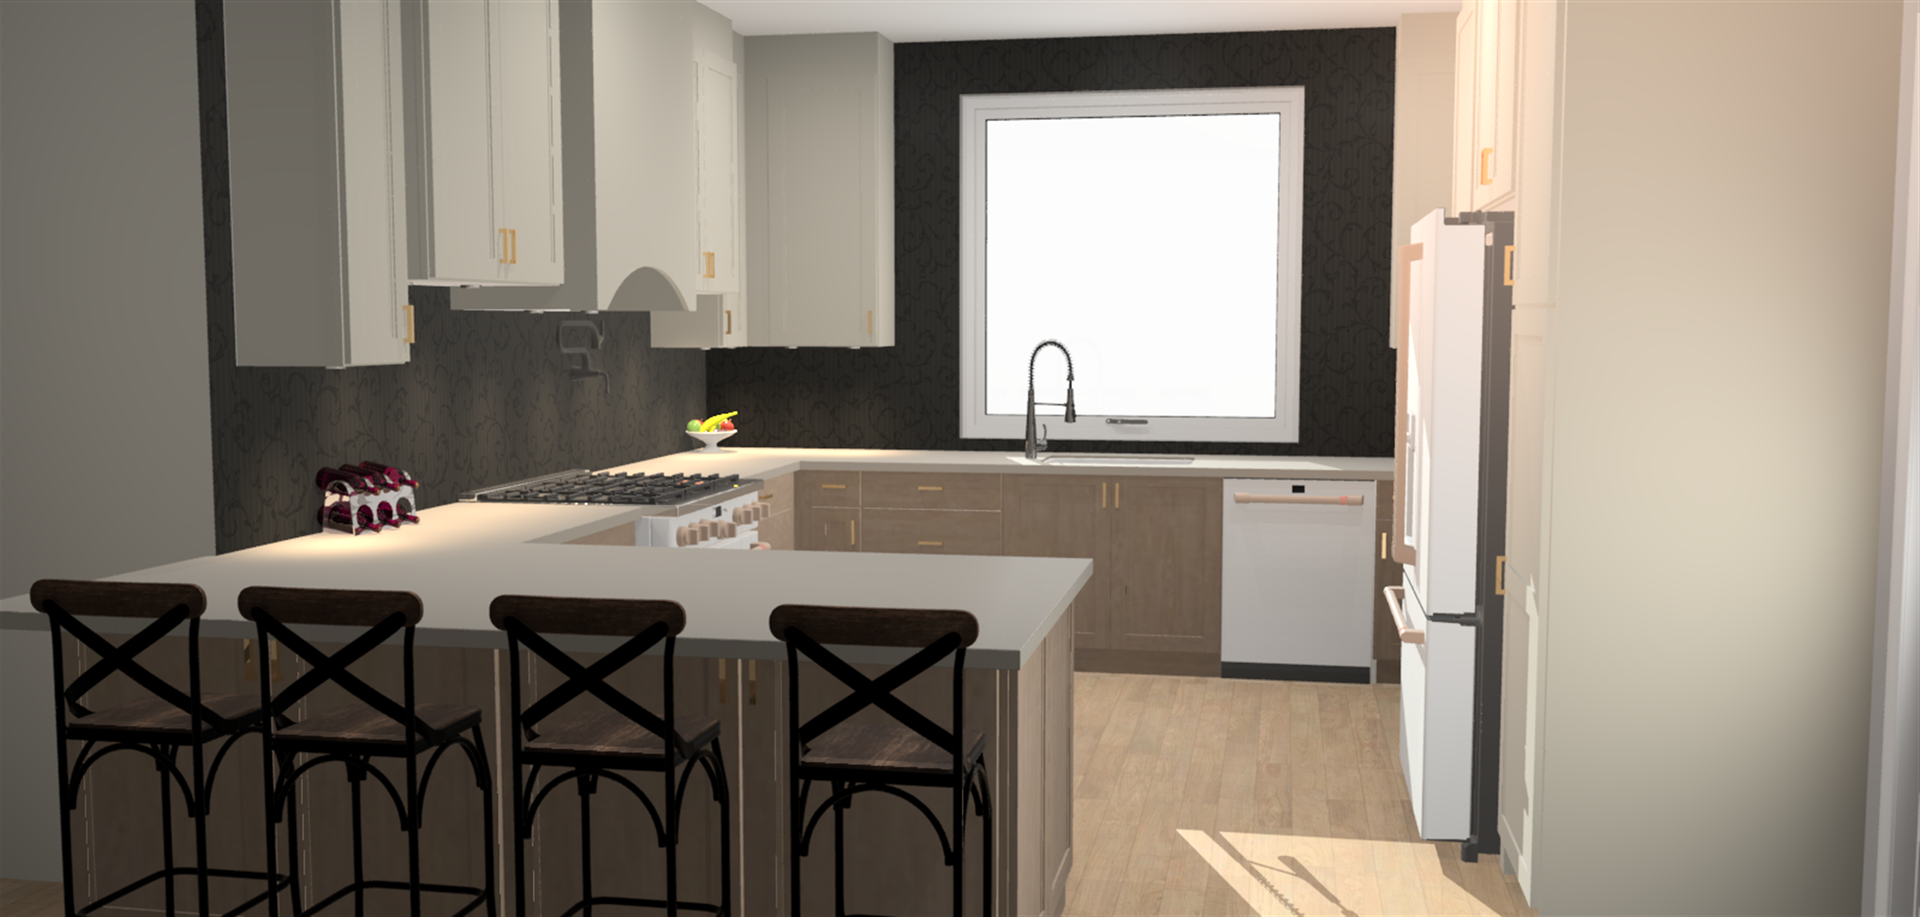 a kitchen with white cabinets and black walls nvrrete